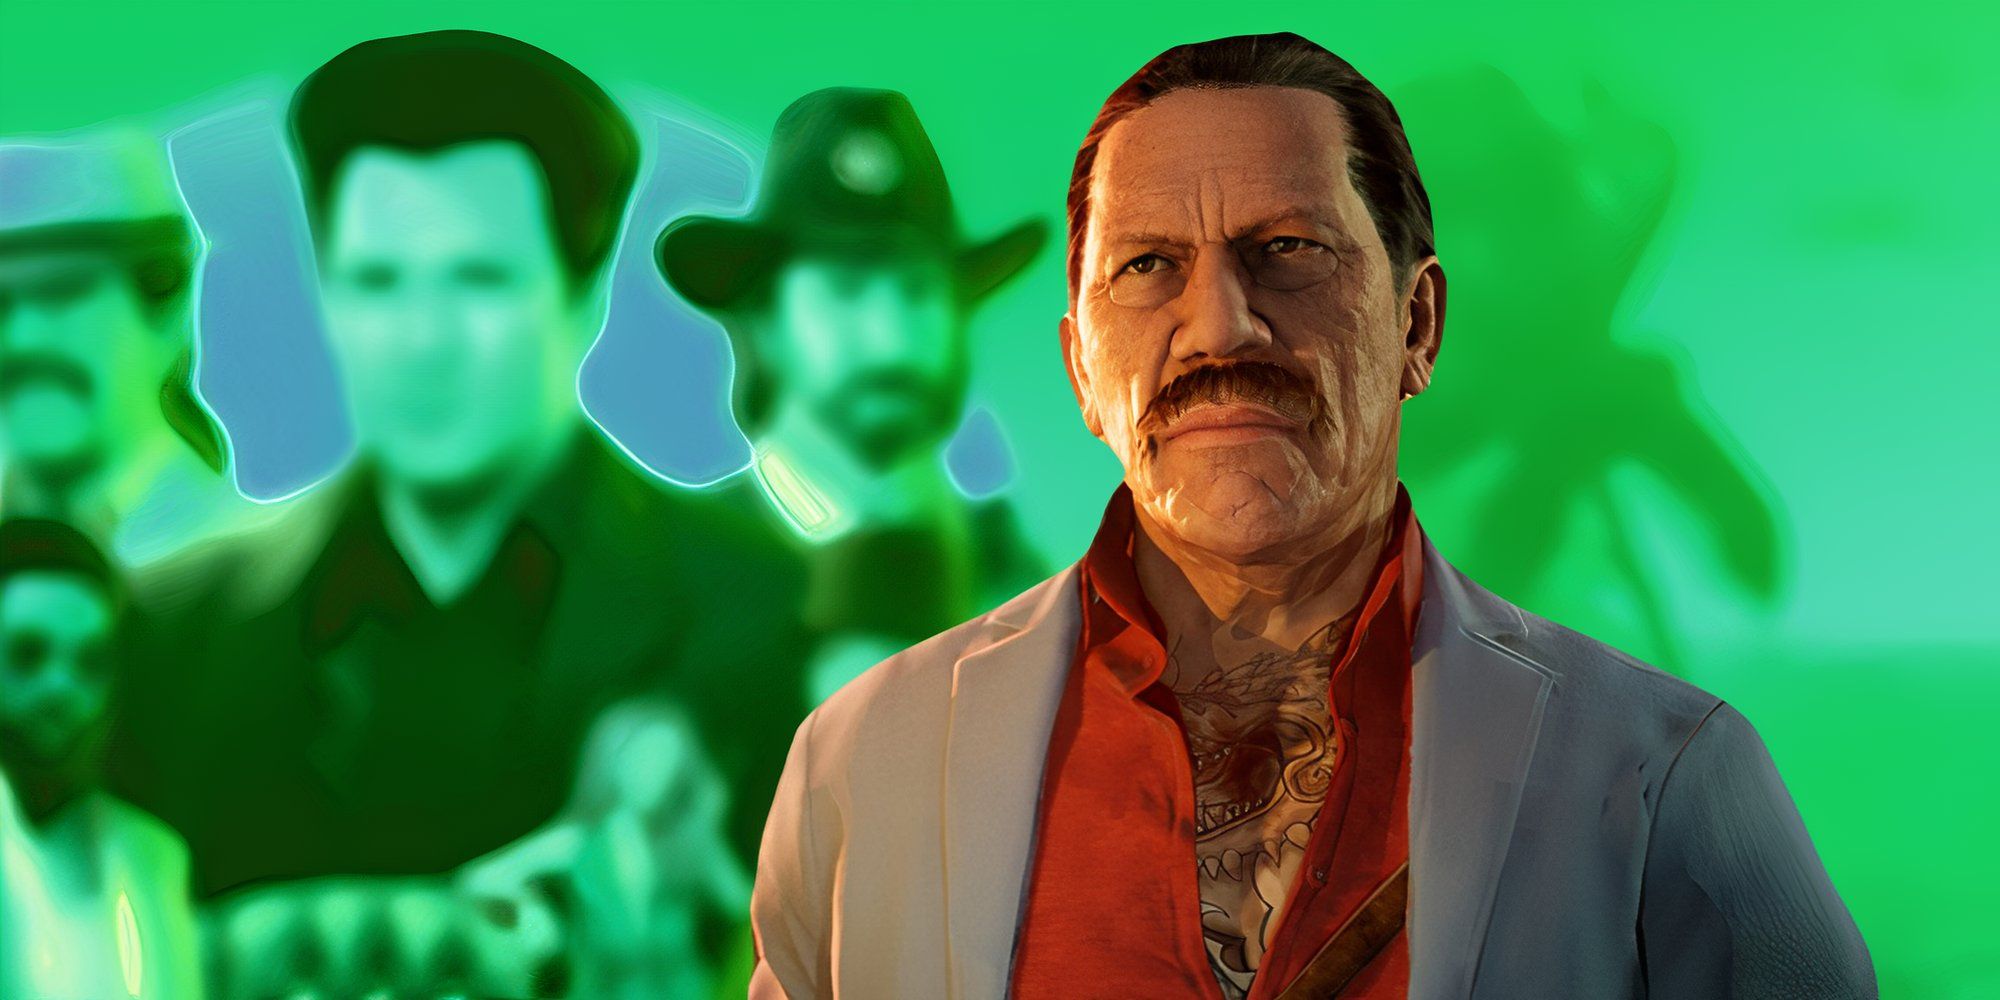 Danny Trejo's Character looking mean In Crime Boss Rockay City on a blurry green background of the game artwork.